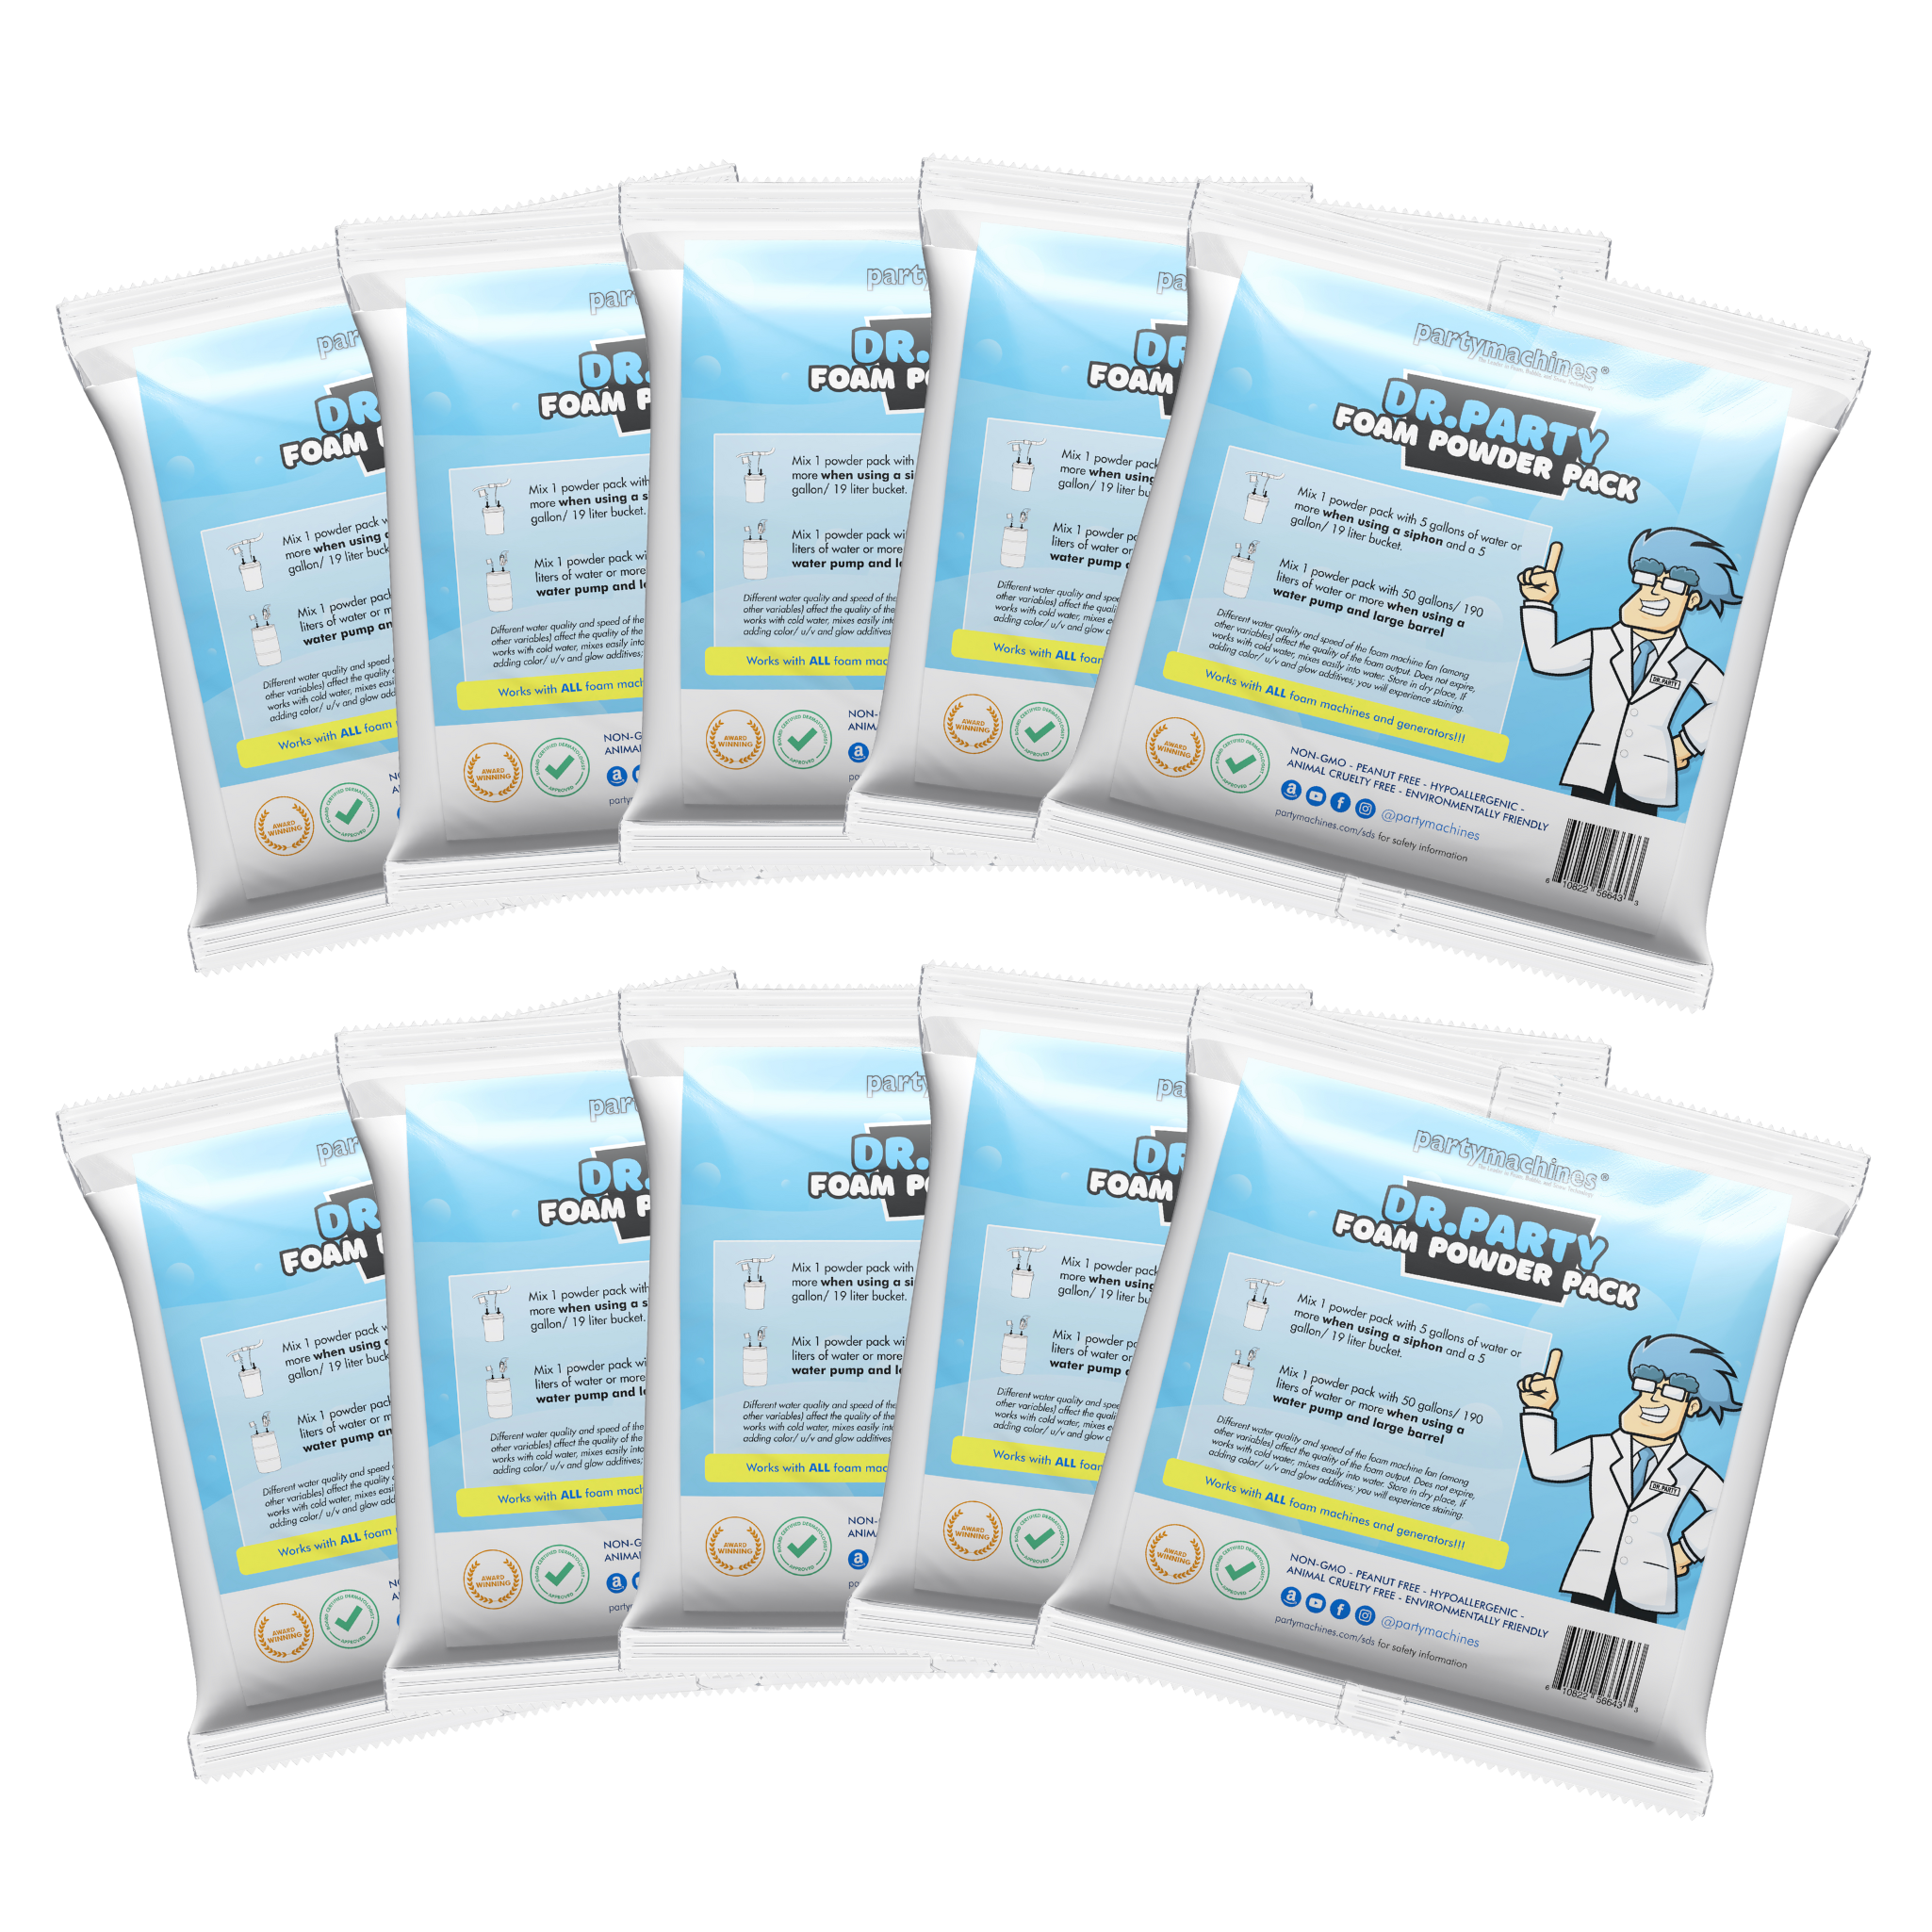 Partymachines Foam Solution - Powder Pack of 10 for 1000+ Gallons of Foam Solution - Most Concentrated Available